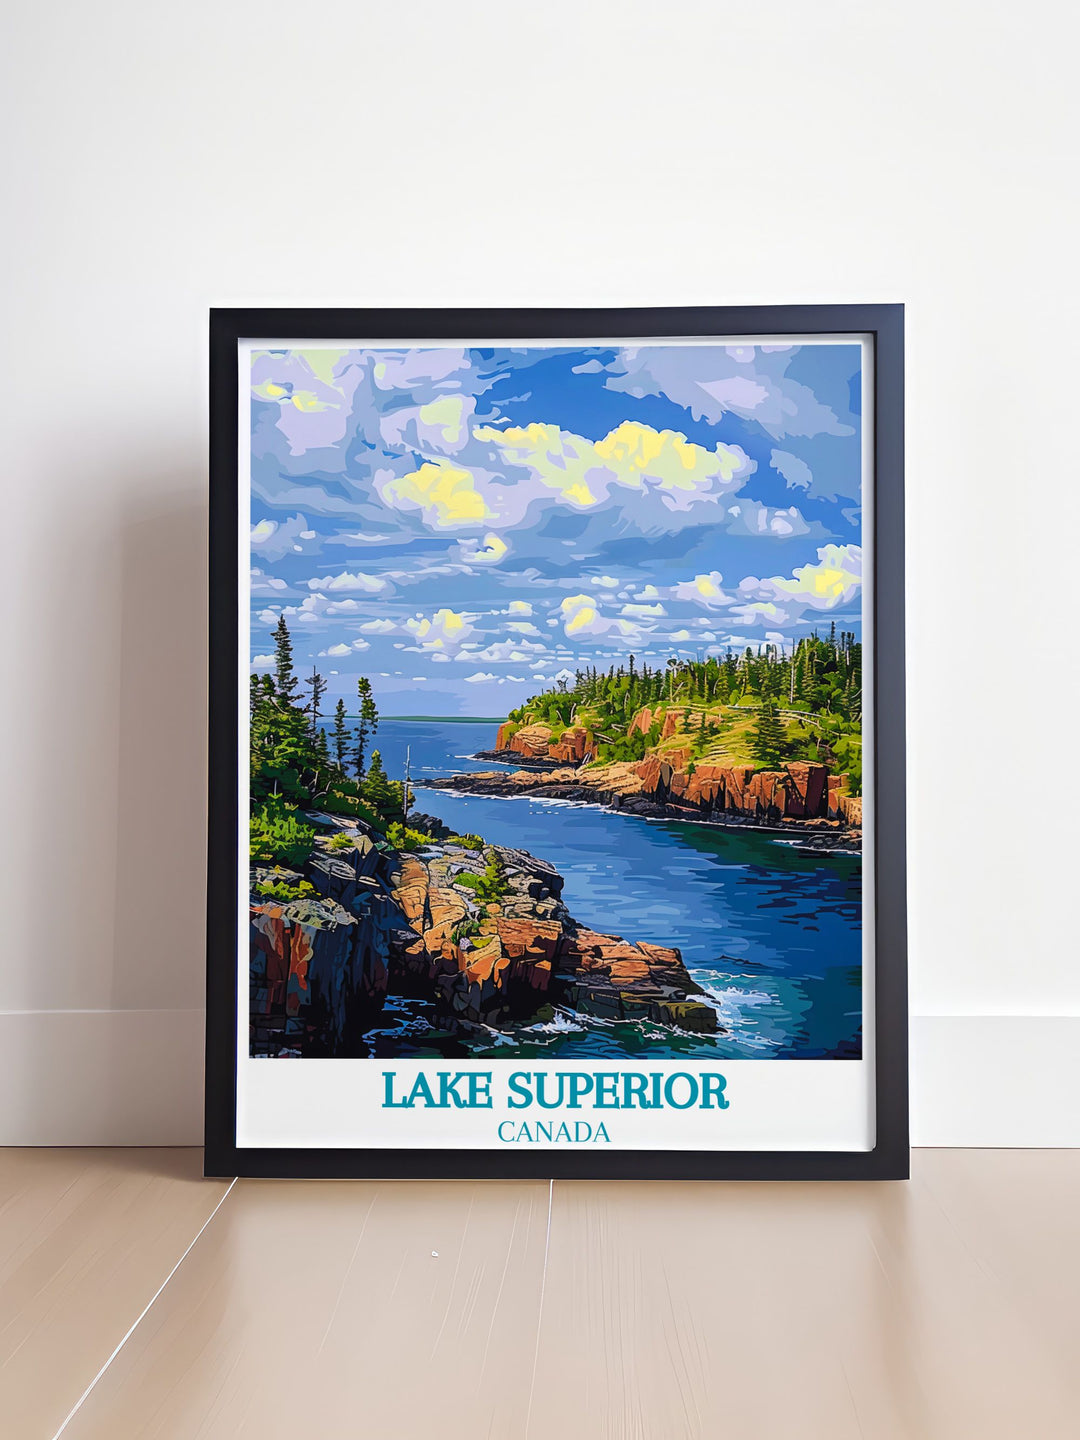 Travel poster of Lake Superior, highlighting its expansive waters and serene environment, ideal for adding natural beauty to your decor.